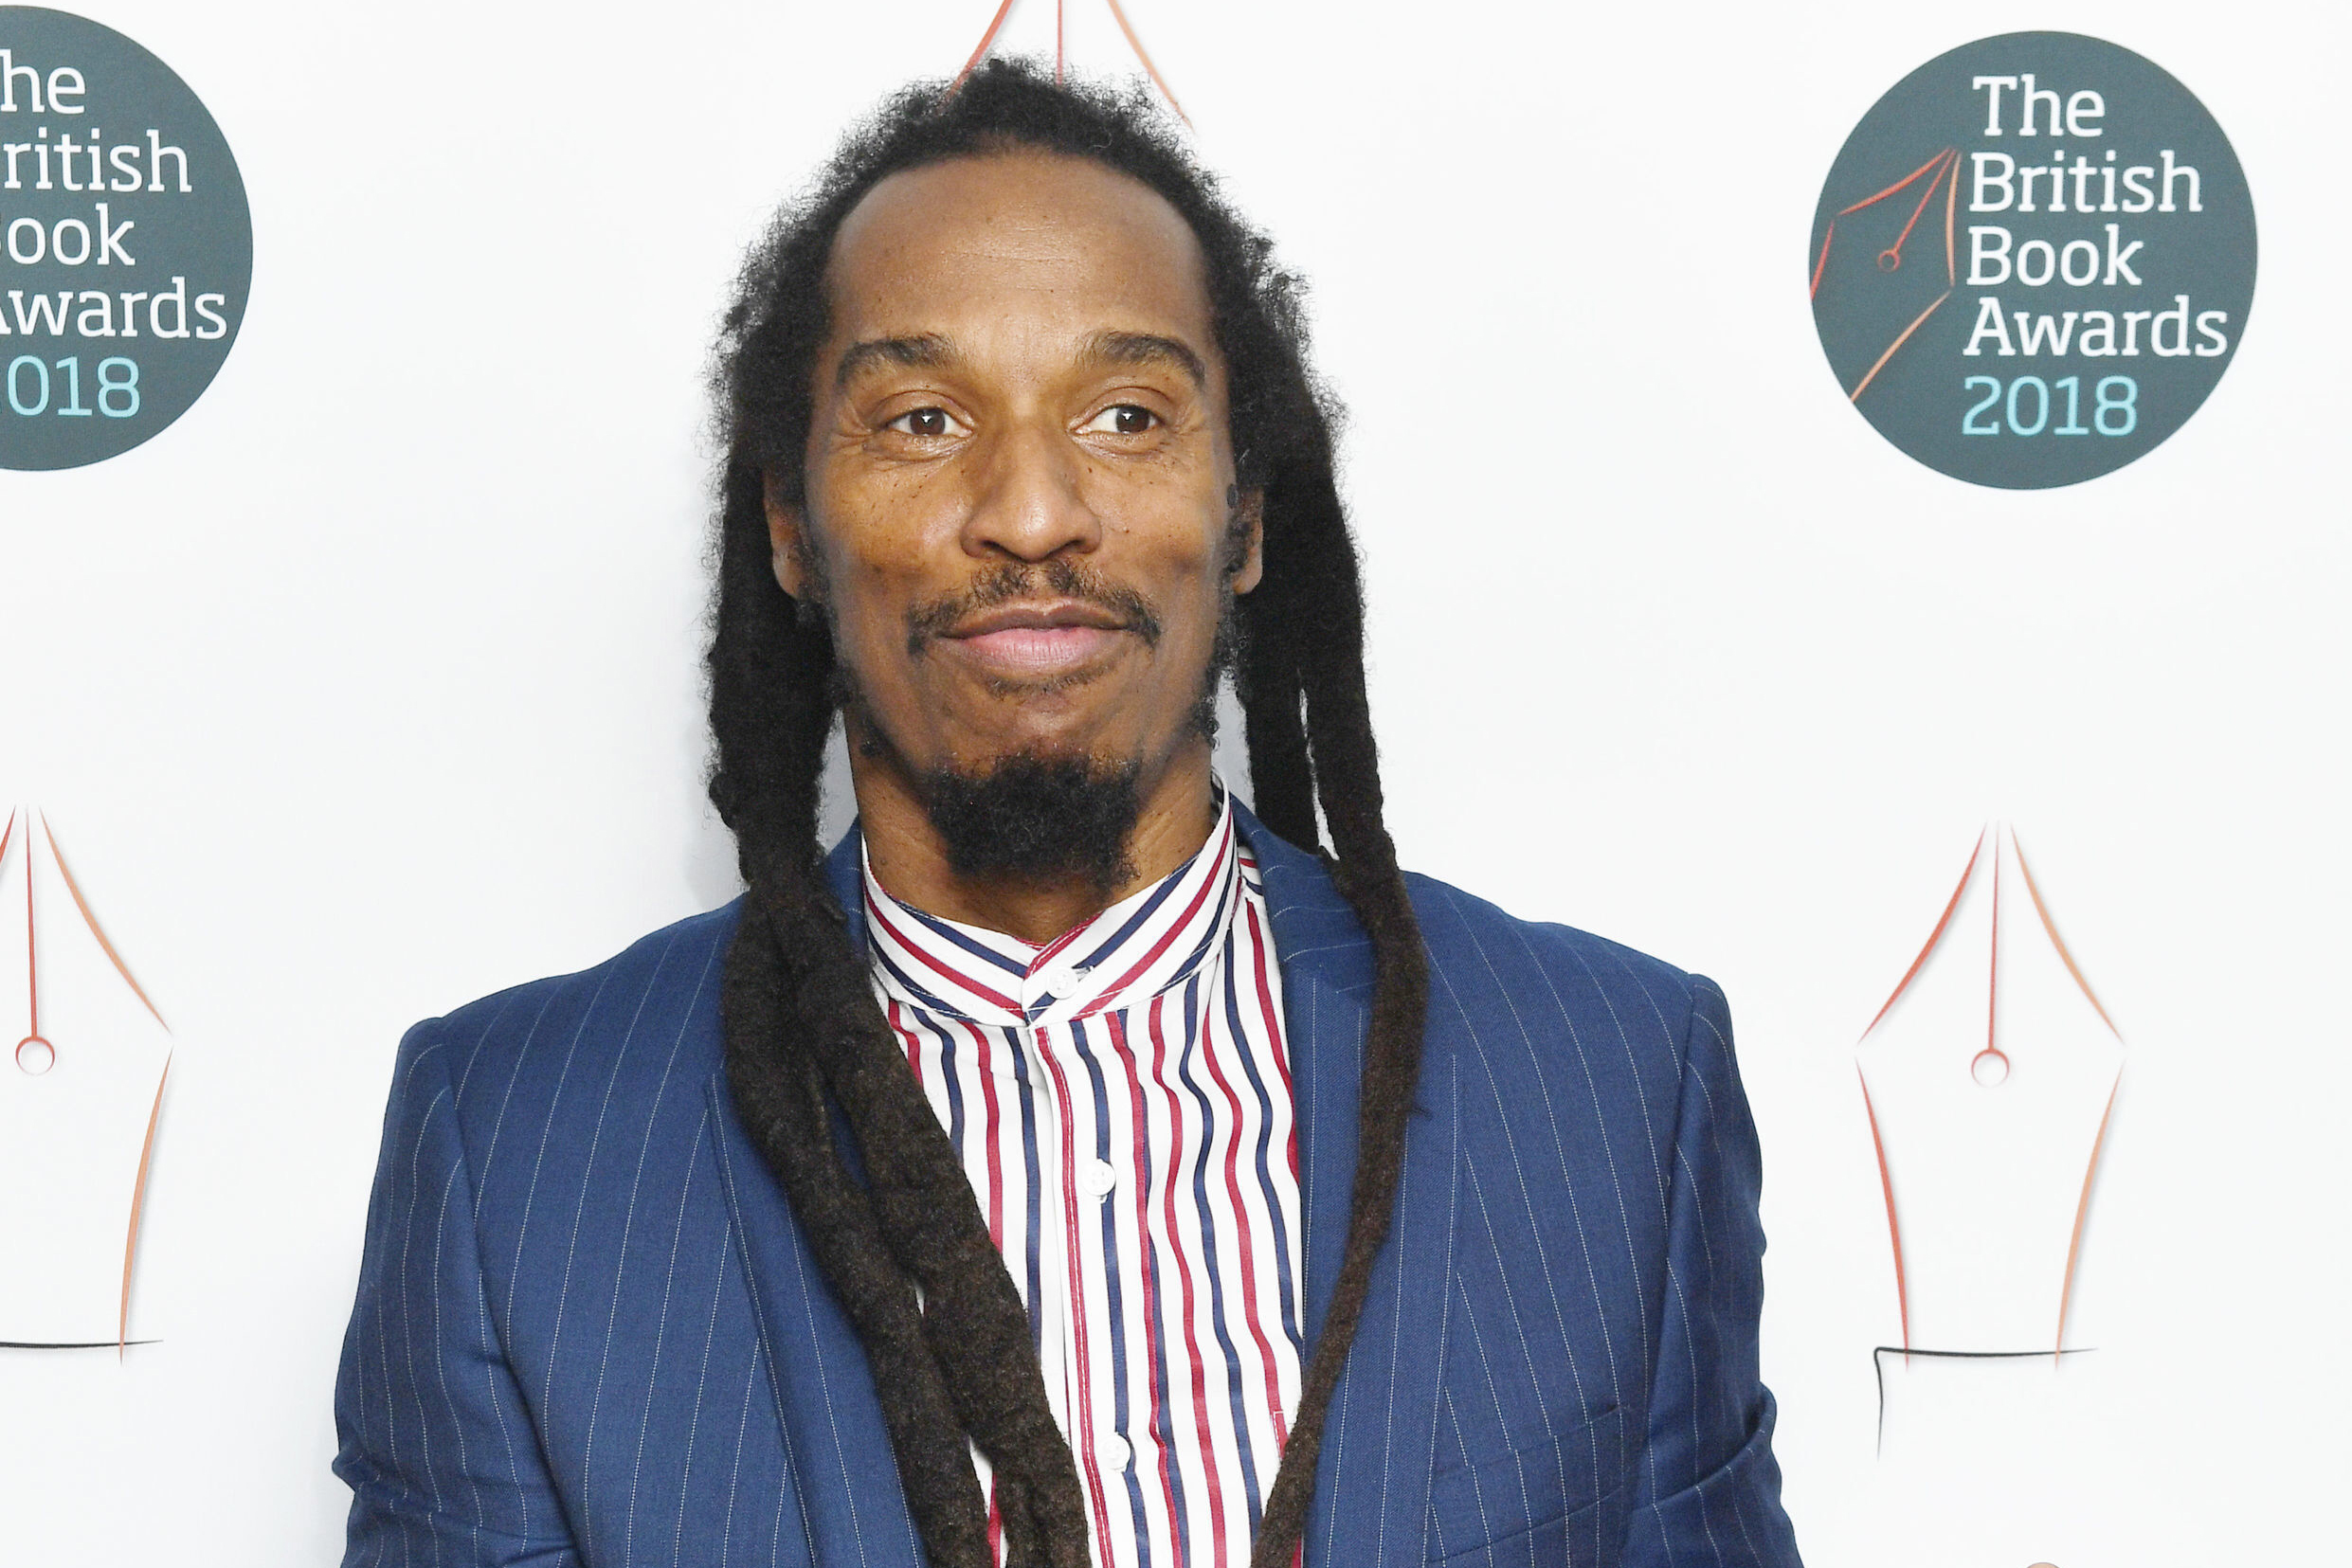 Benjamin Zephaniah, Black British poet and political activist who spoke out on issues of race, dies at 65